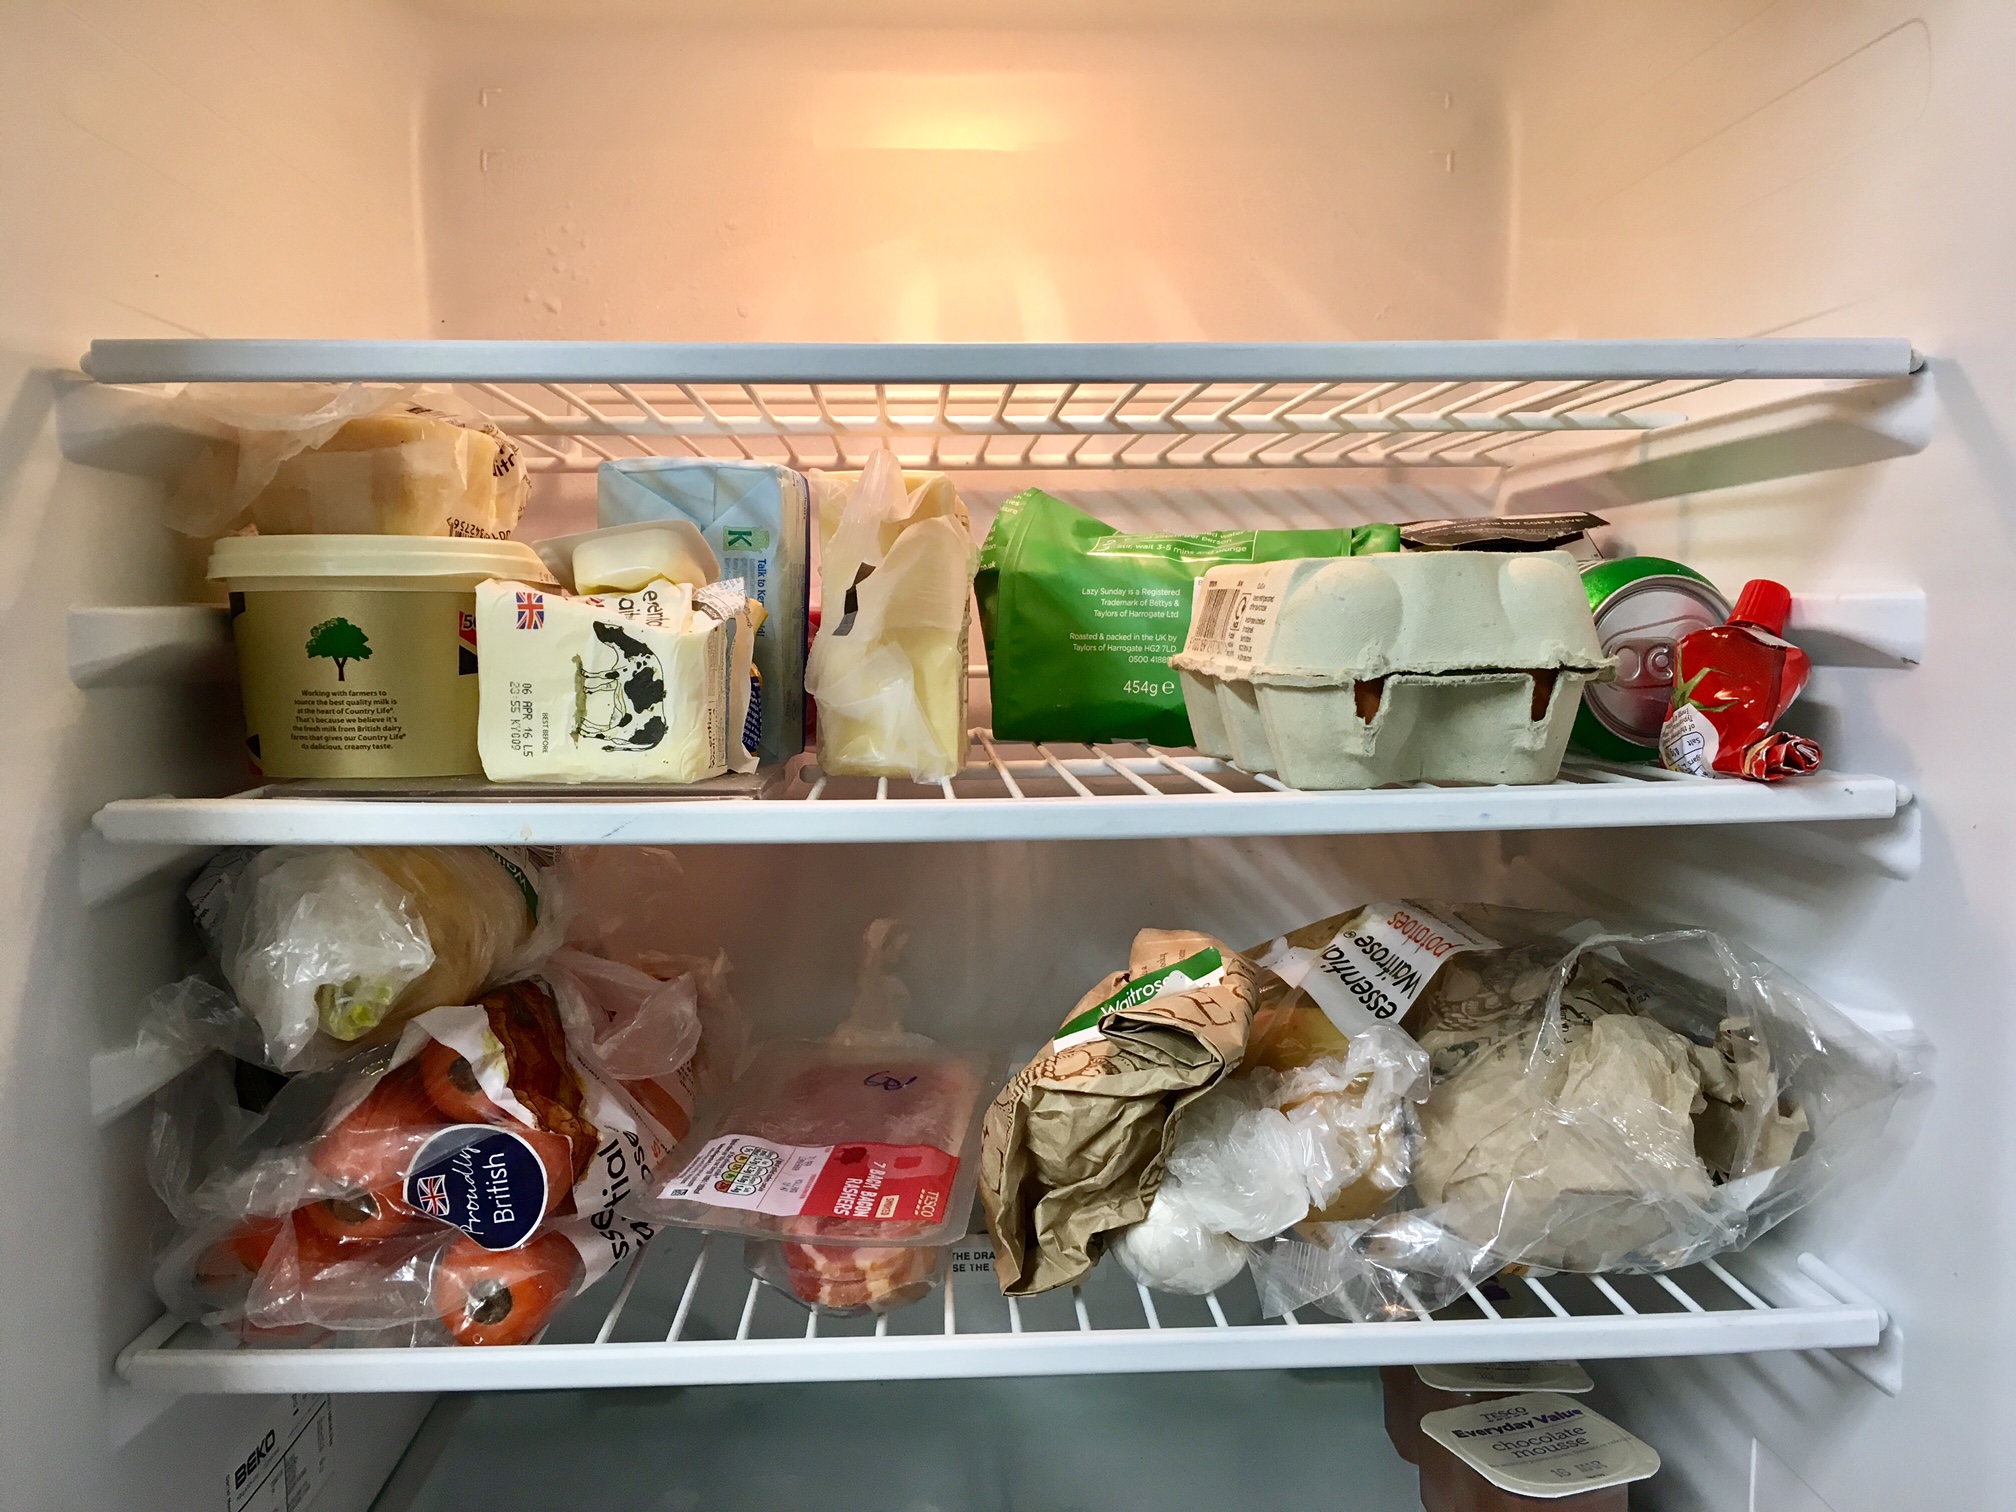 A sure-fire way to invoke envy is to fill your fridge shelves with food, when your flatmates have nothing. [PHOTO: Andrew Burdett 2016]